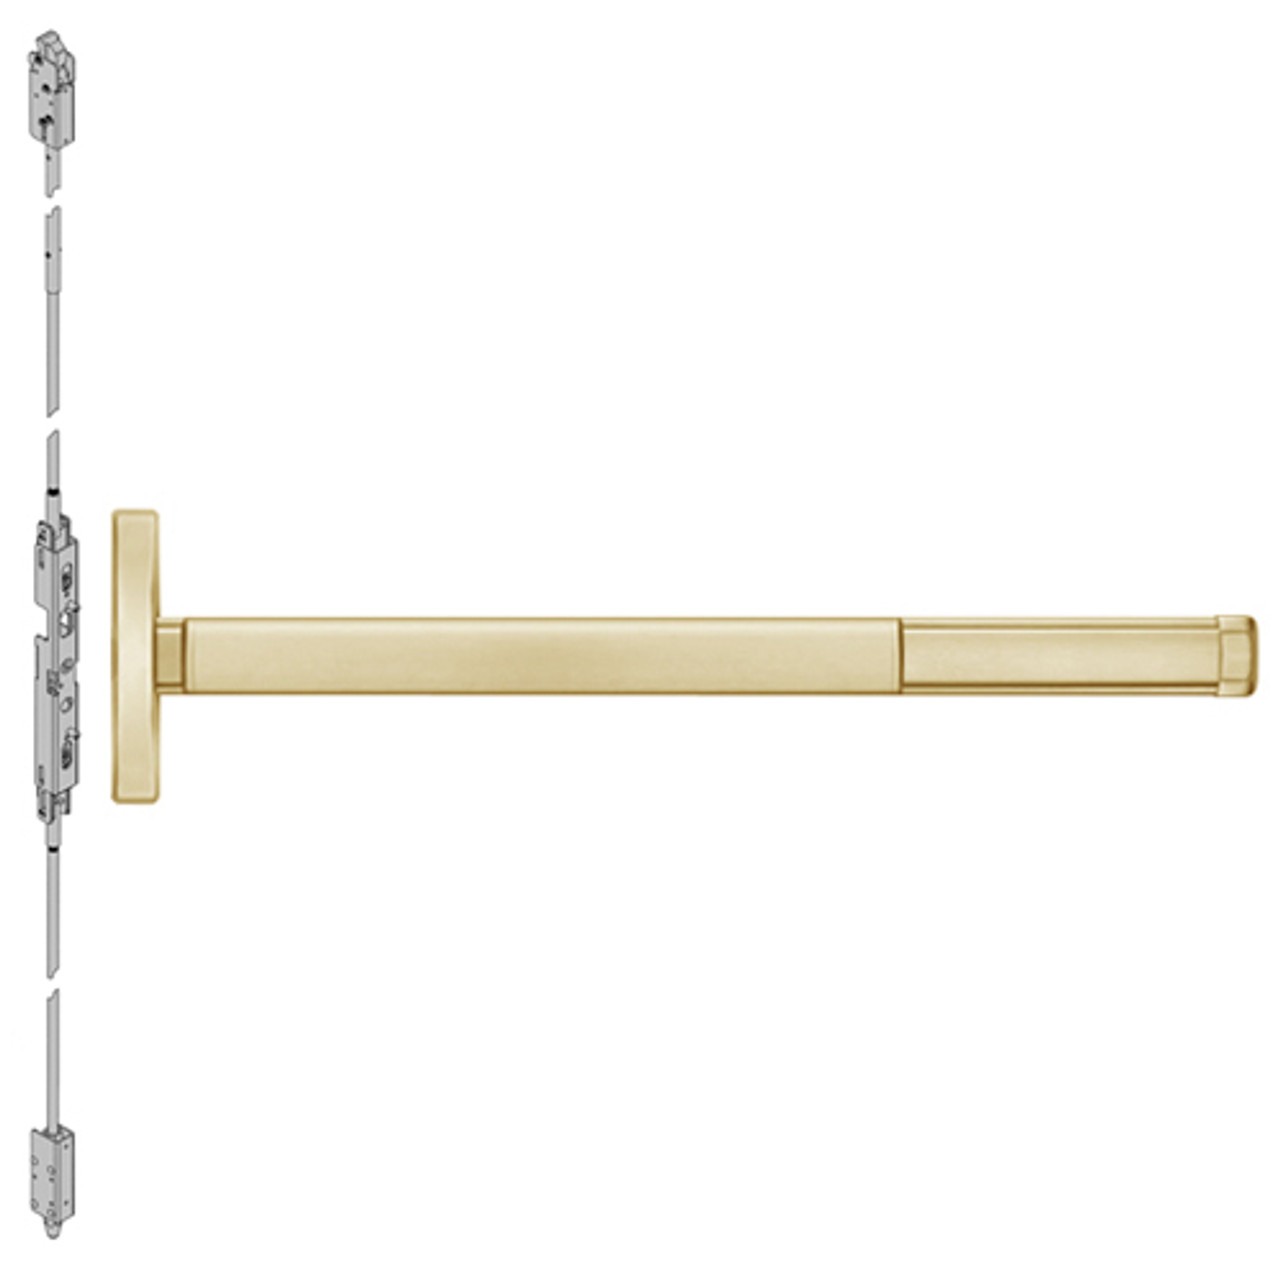 ELRFL2601-606-36 PHI 2600 Series Fire Rated Concealed Vertical Rod Exit Device with Electric Latch Retraction Prepped for Cover Plate in Satin Brass Finish